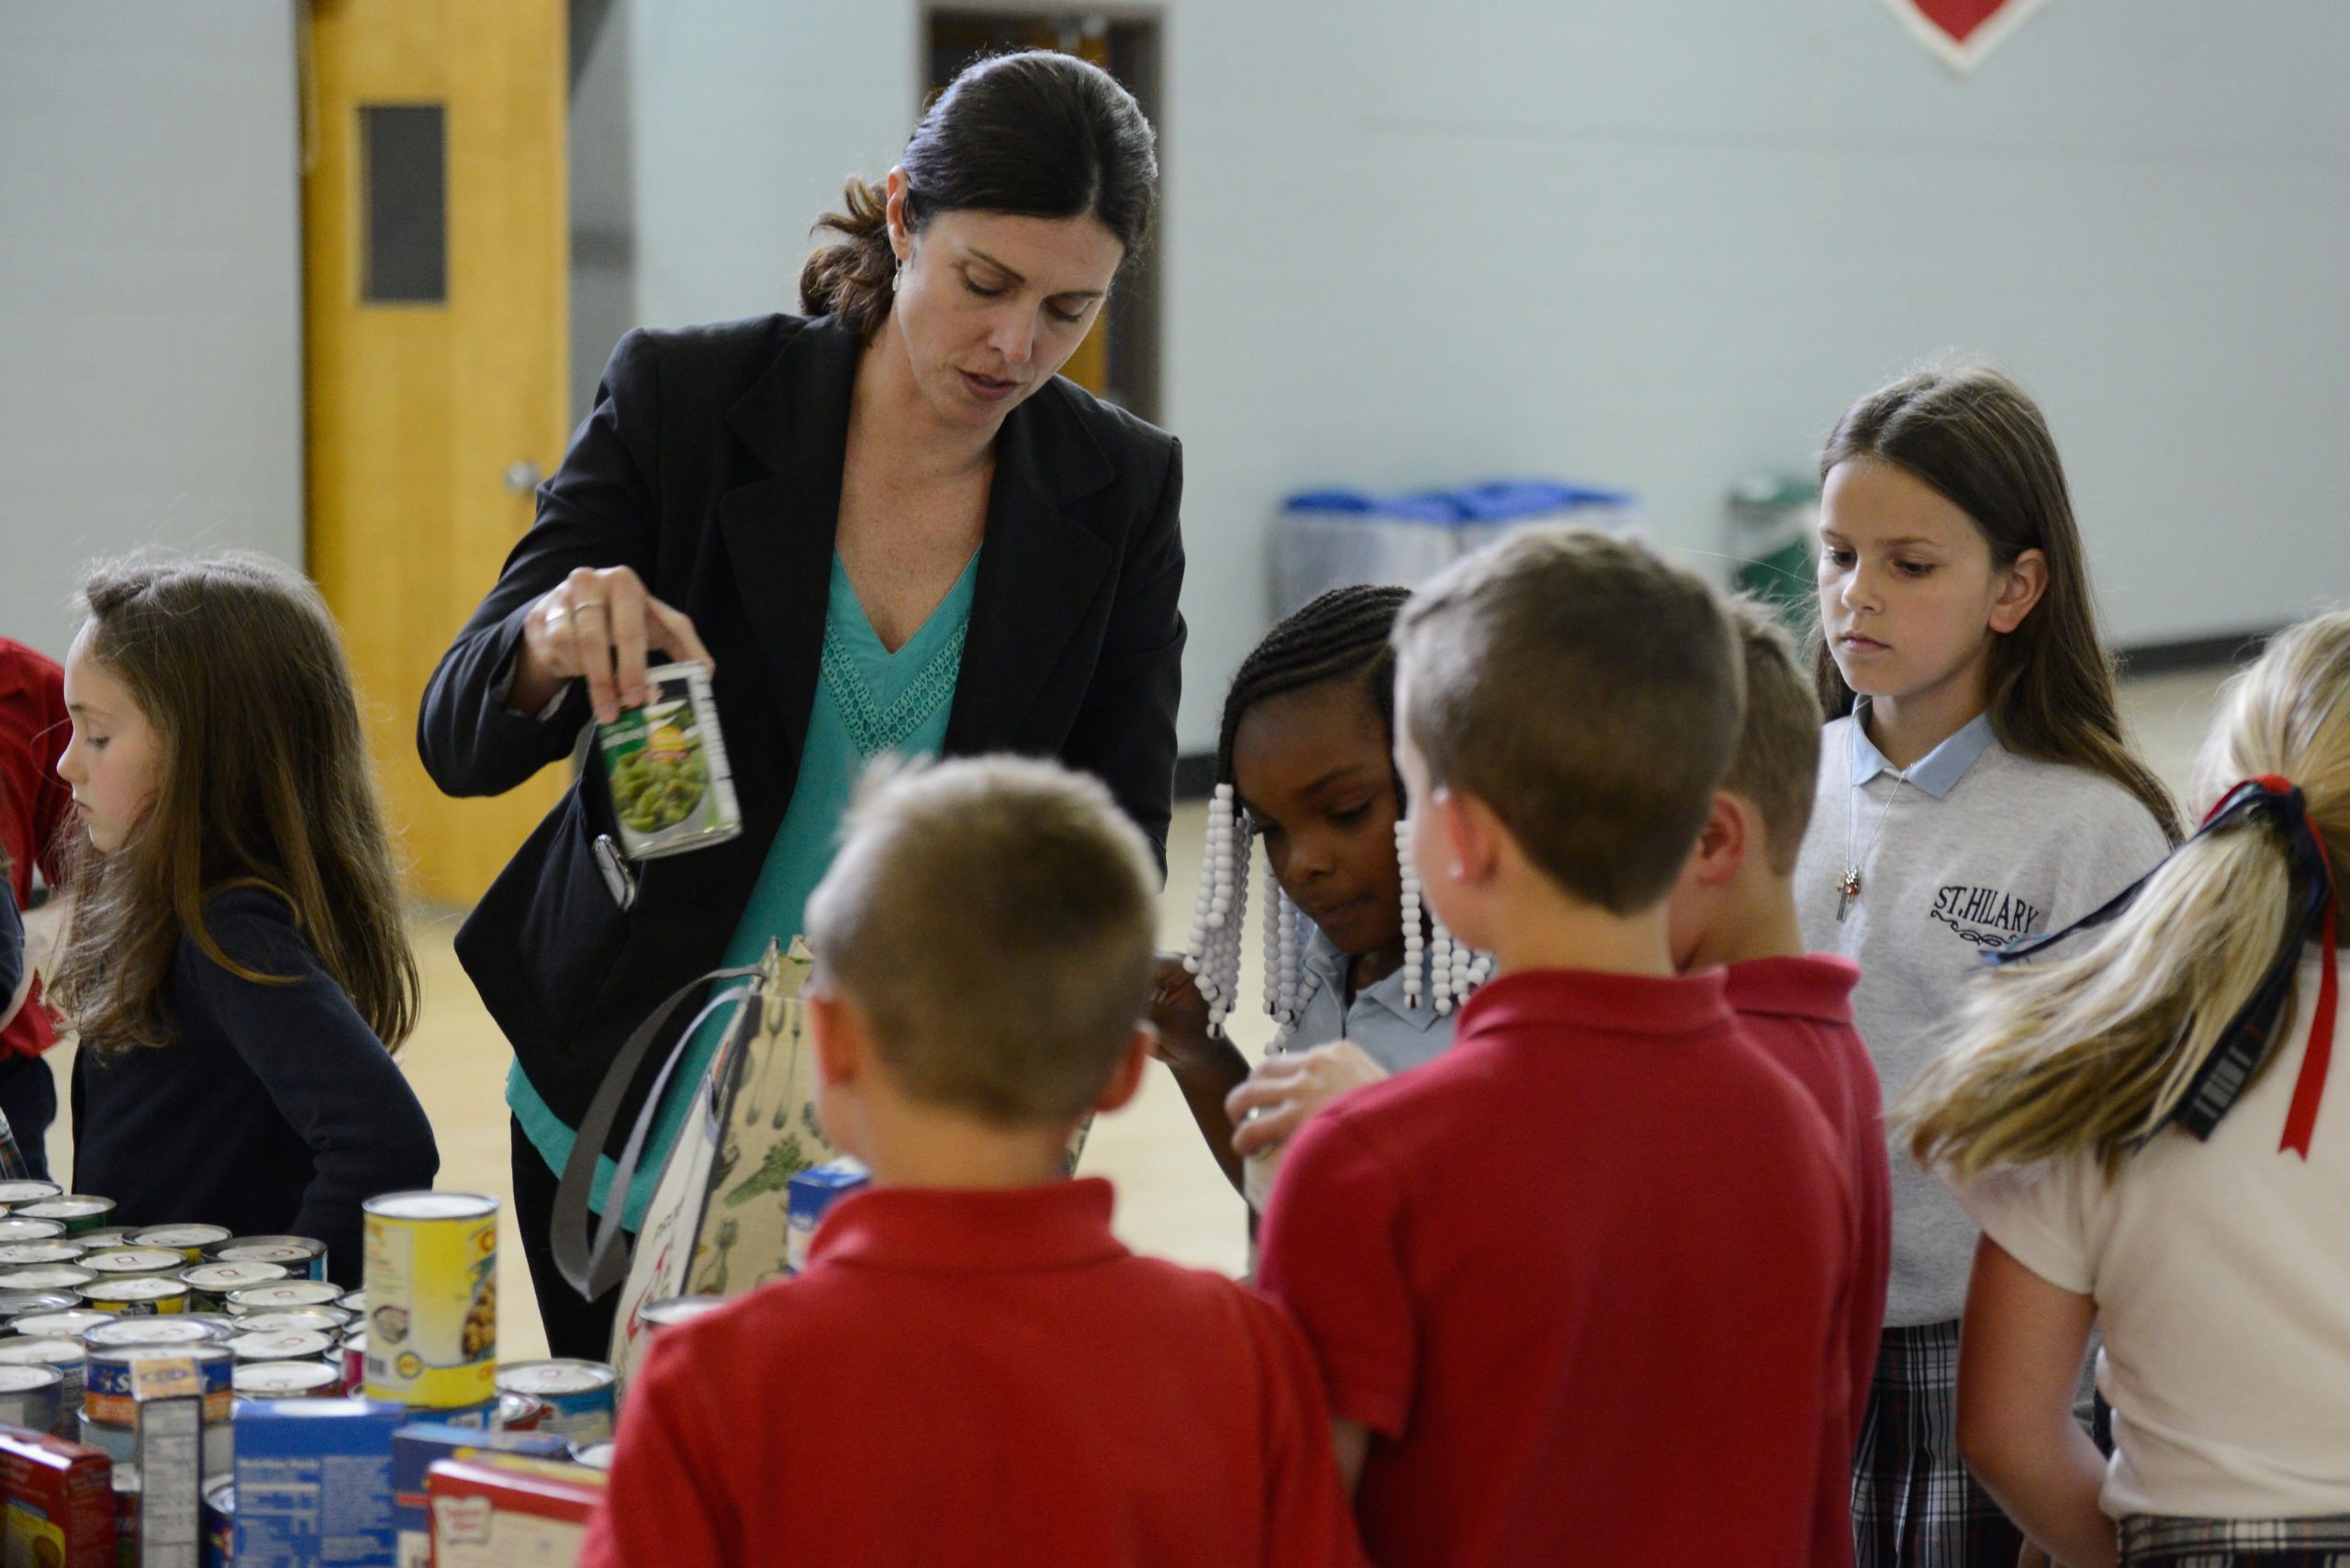  Shelly Hinton, Vice President of Akron-Canton Regional Food Bank, speaks to students at Saint Hillary School about the Hungry To Help Lesson Plan on May 24, 2017 in Fairlawn, Ohio. (Photo by Duane Prokop/Getty Images for Feeding America)